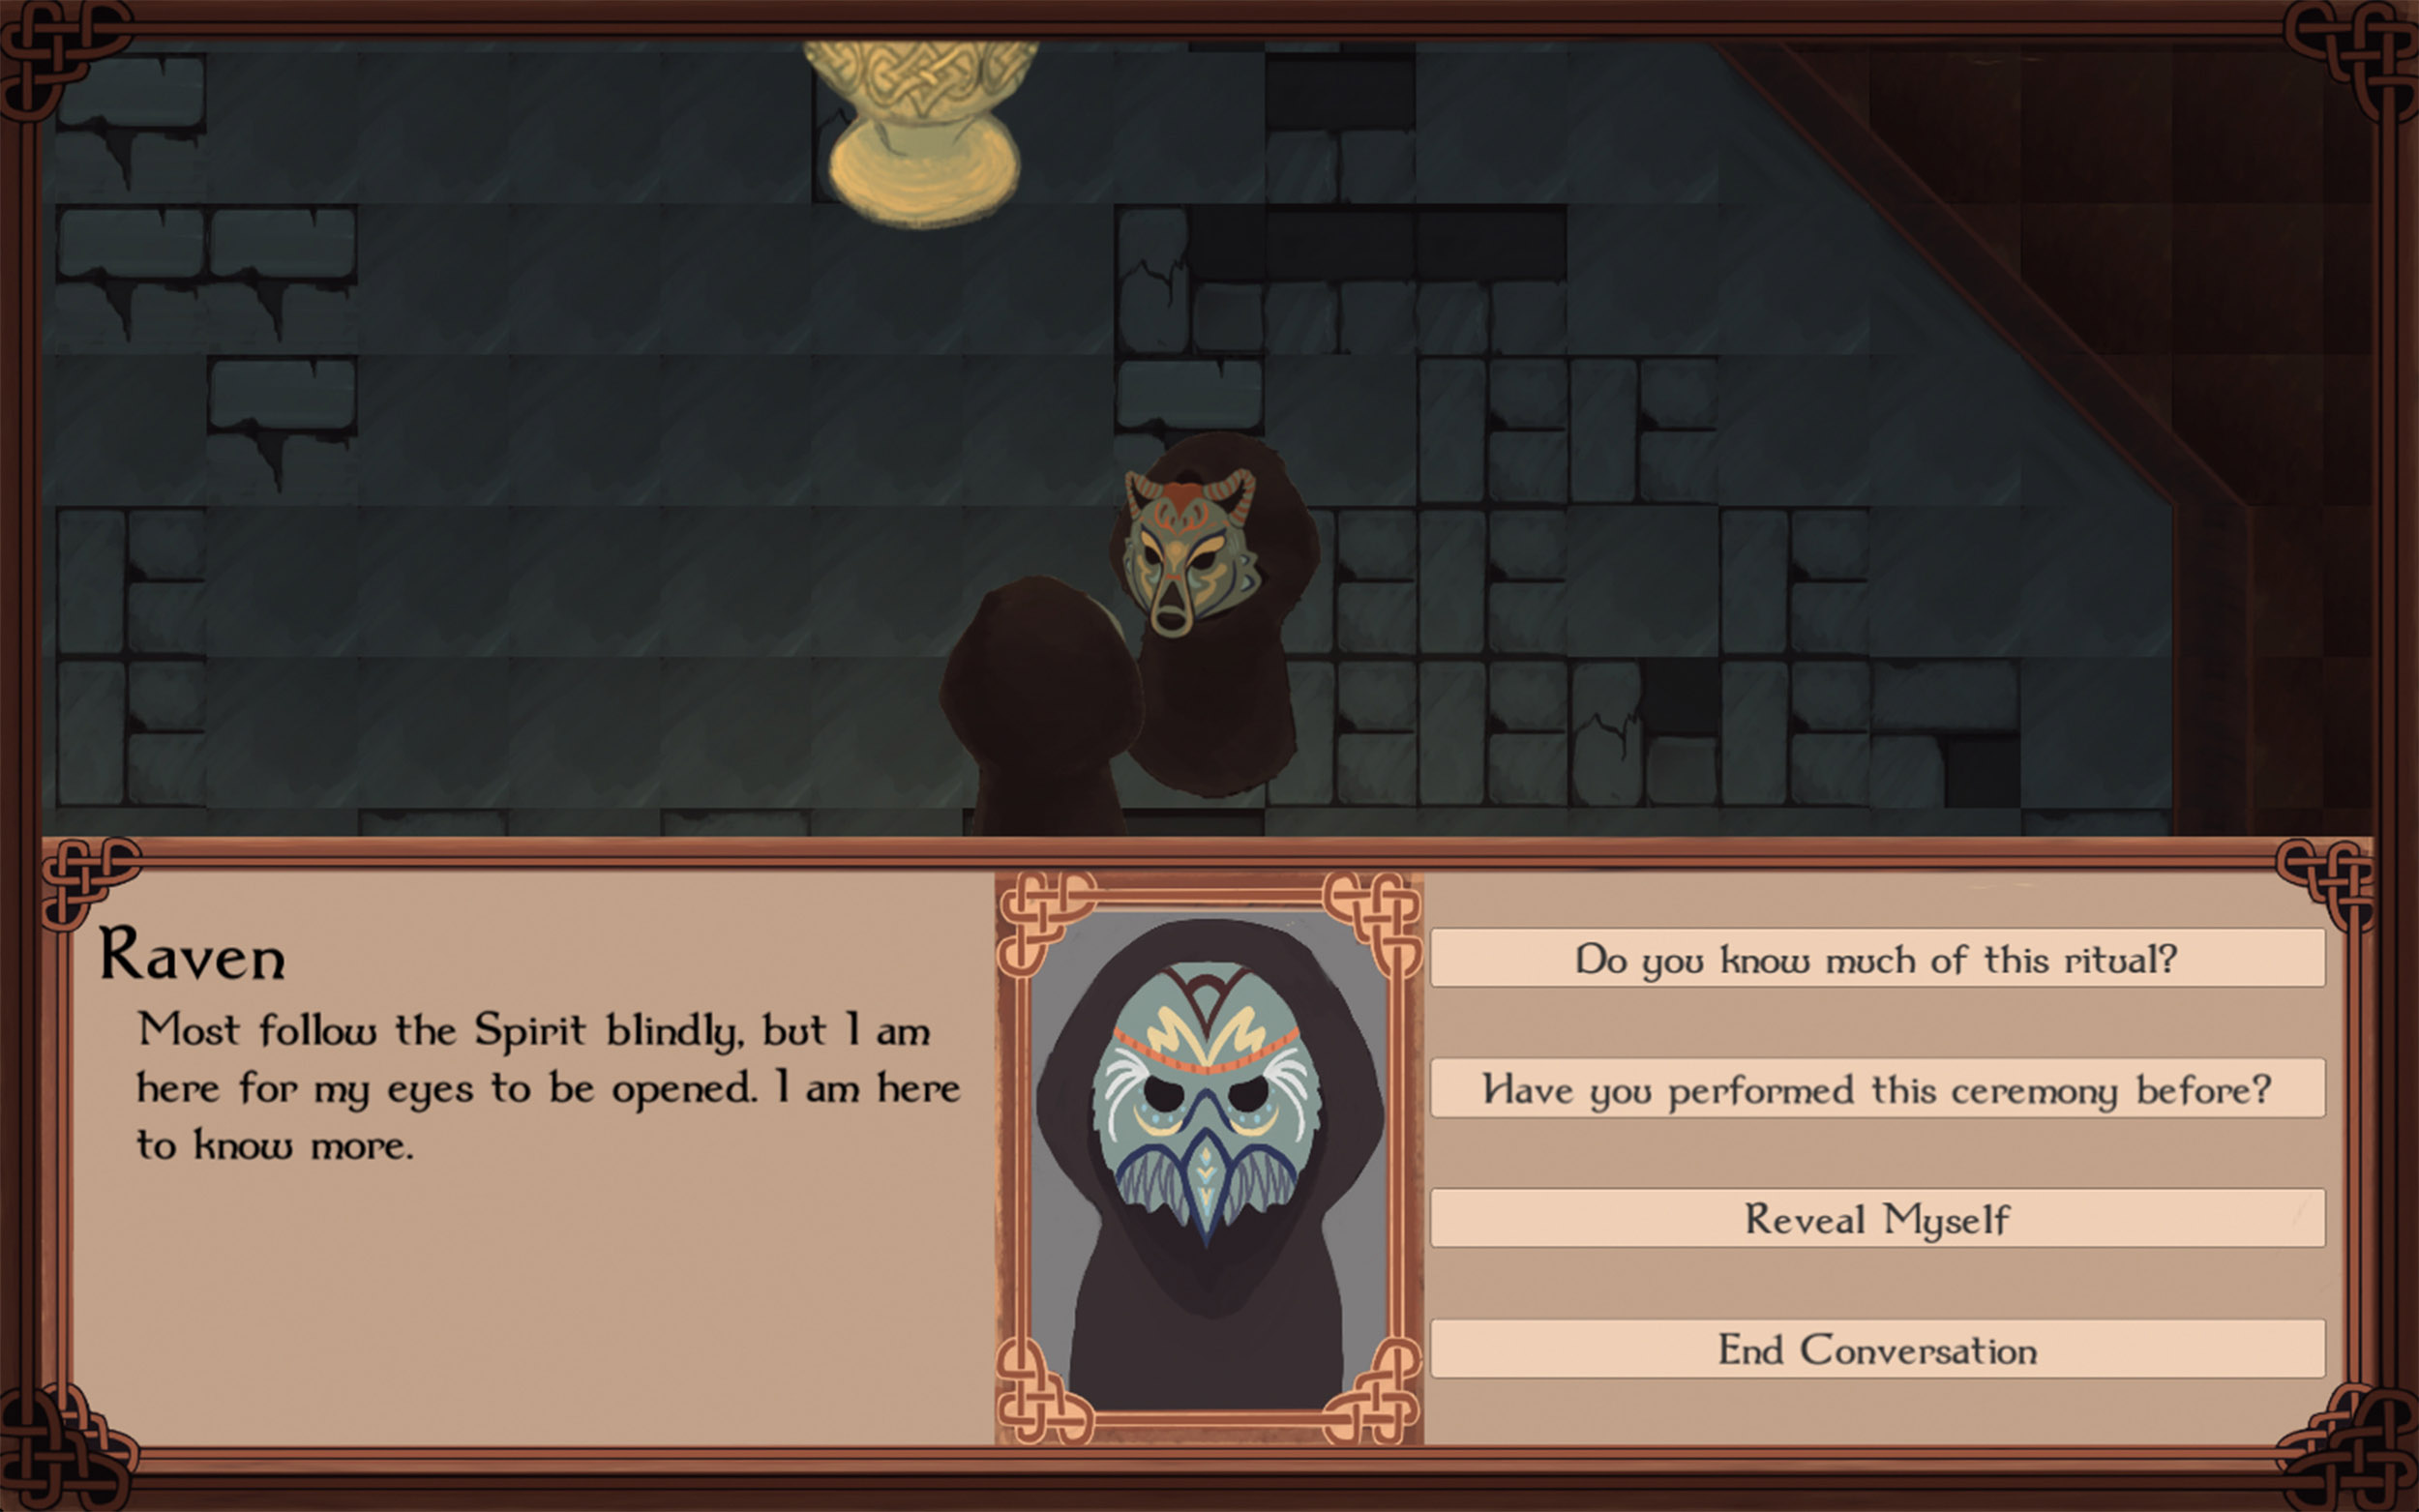 View full size version of a screenshot of gameplay, where characters talk to one another and a dialog box for the masked raven sits at the bottom of the screen